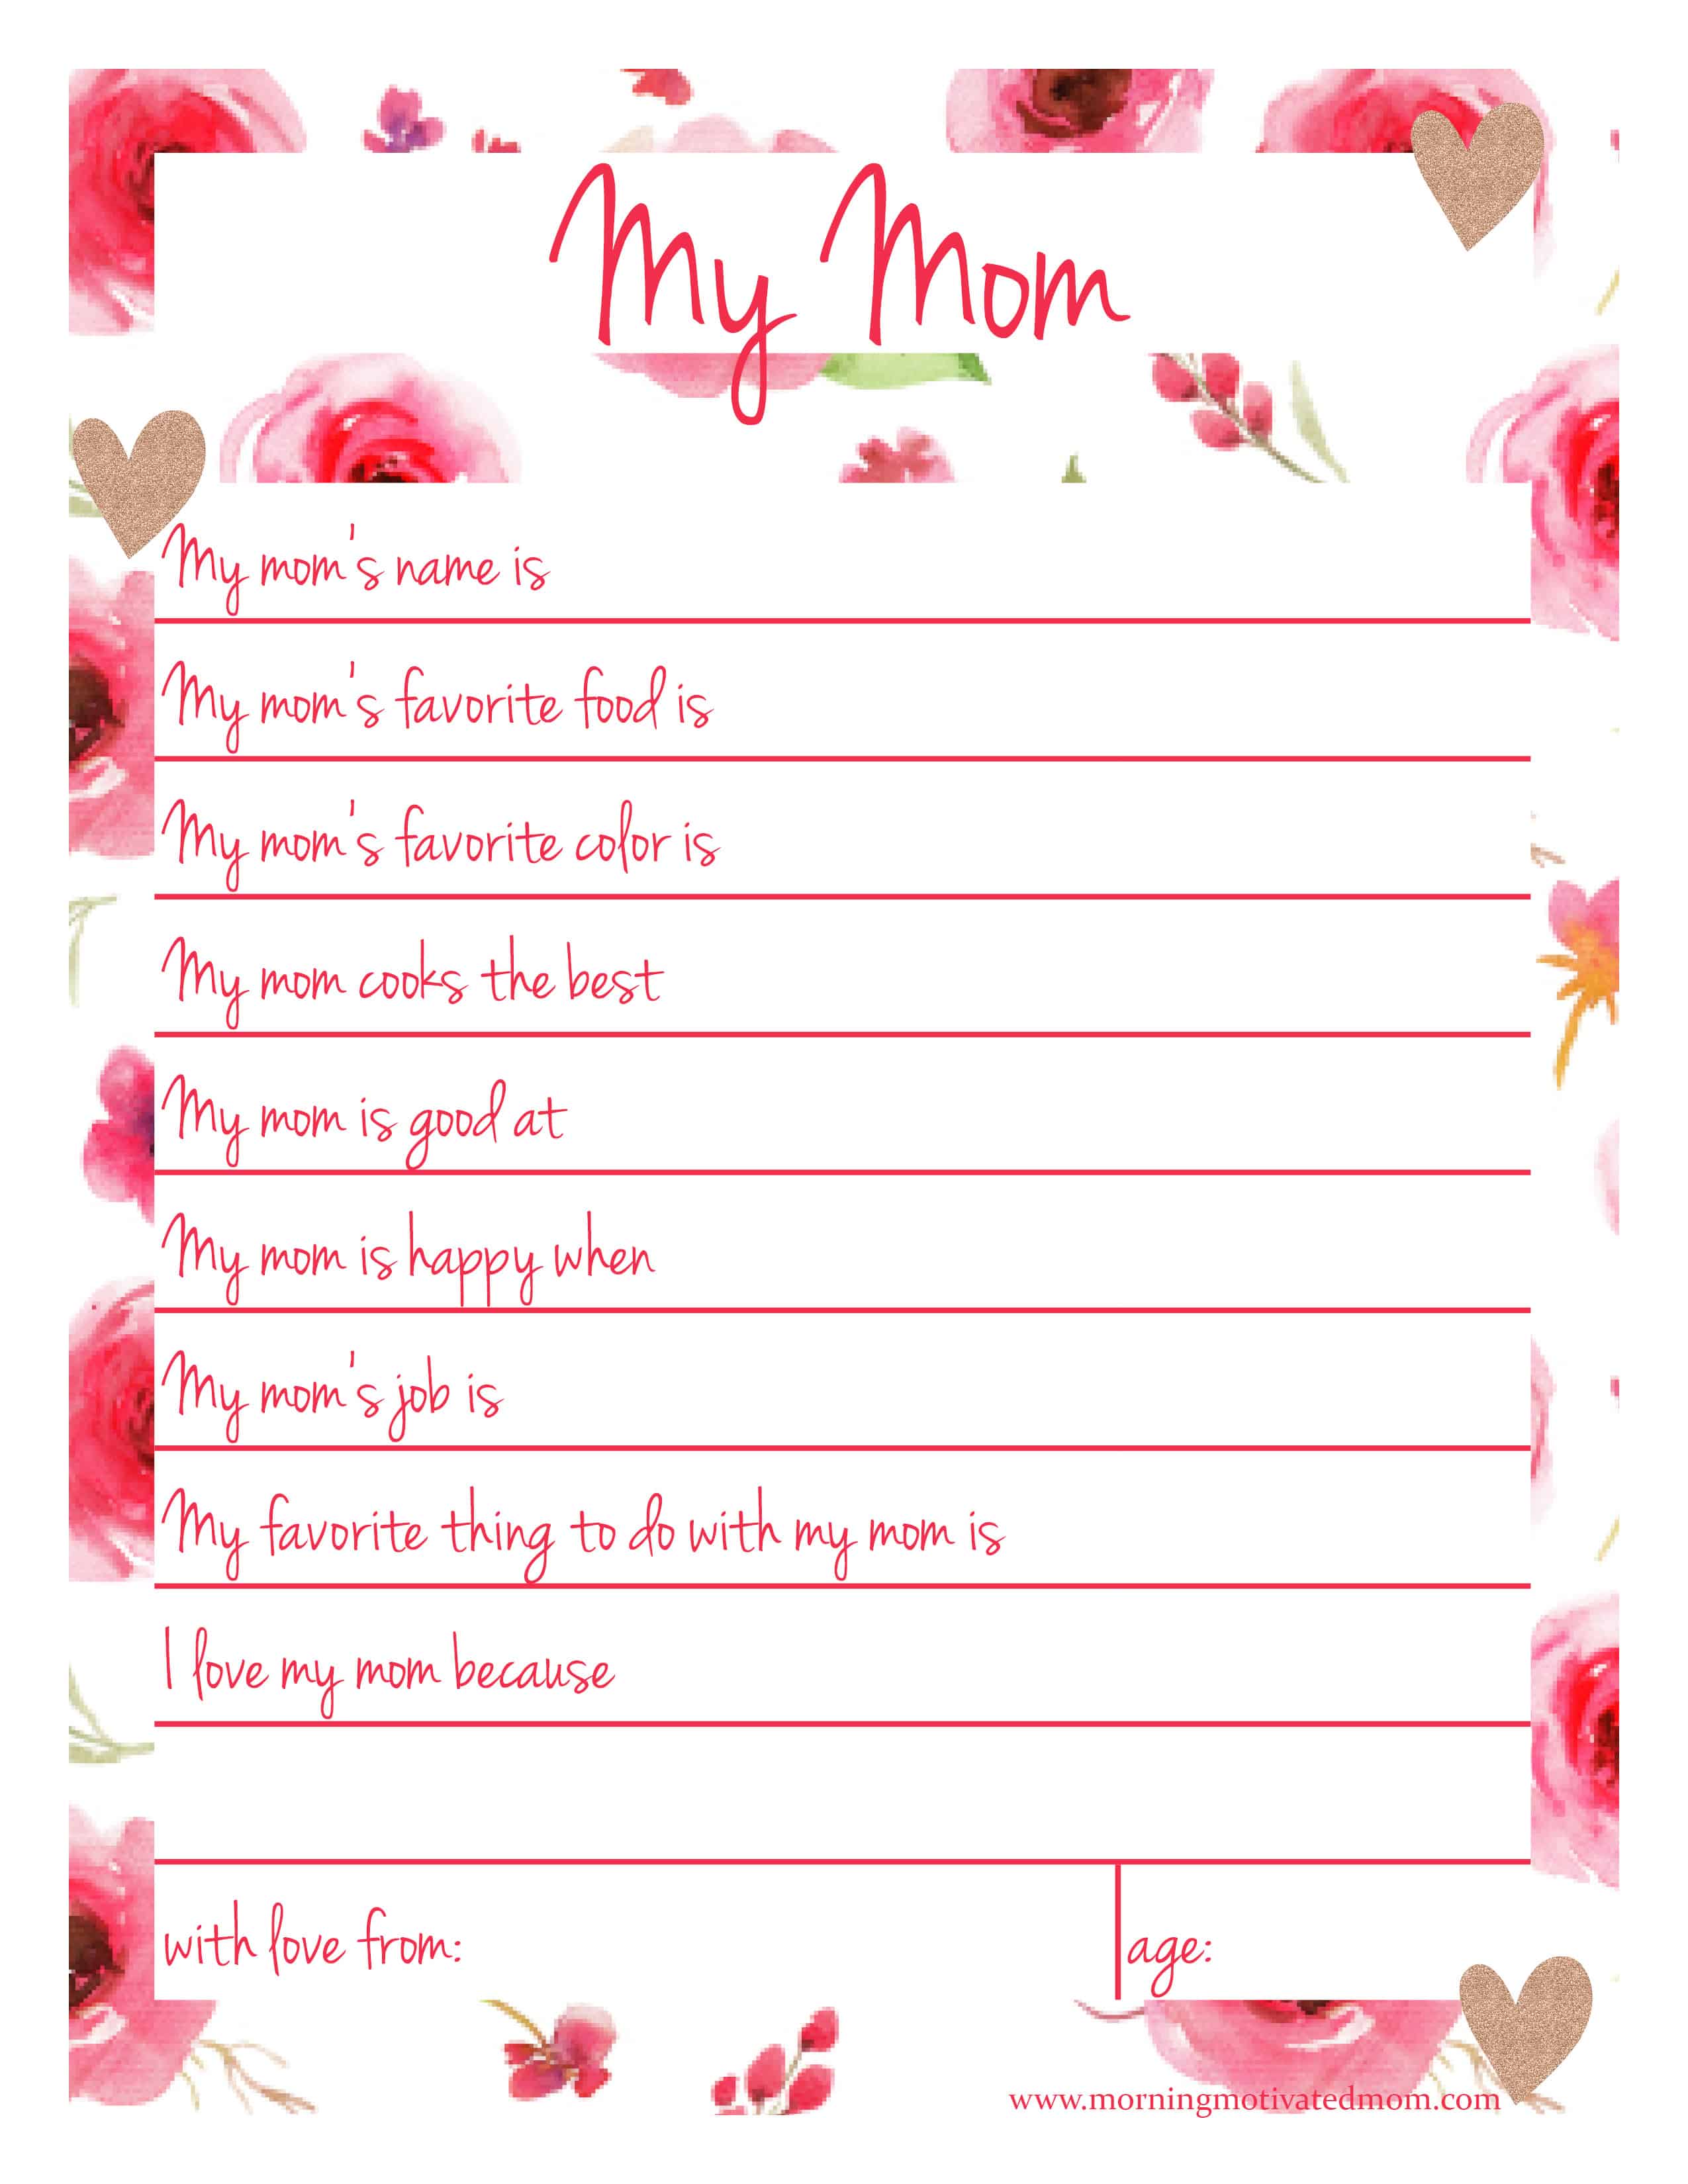 50 Things I Love About My Mom • Healthy Helper